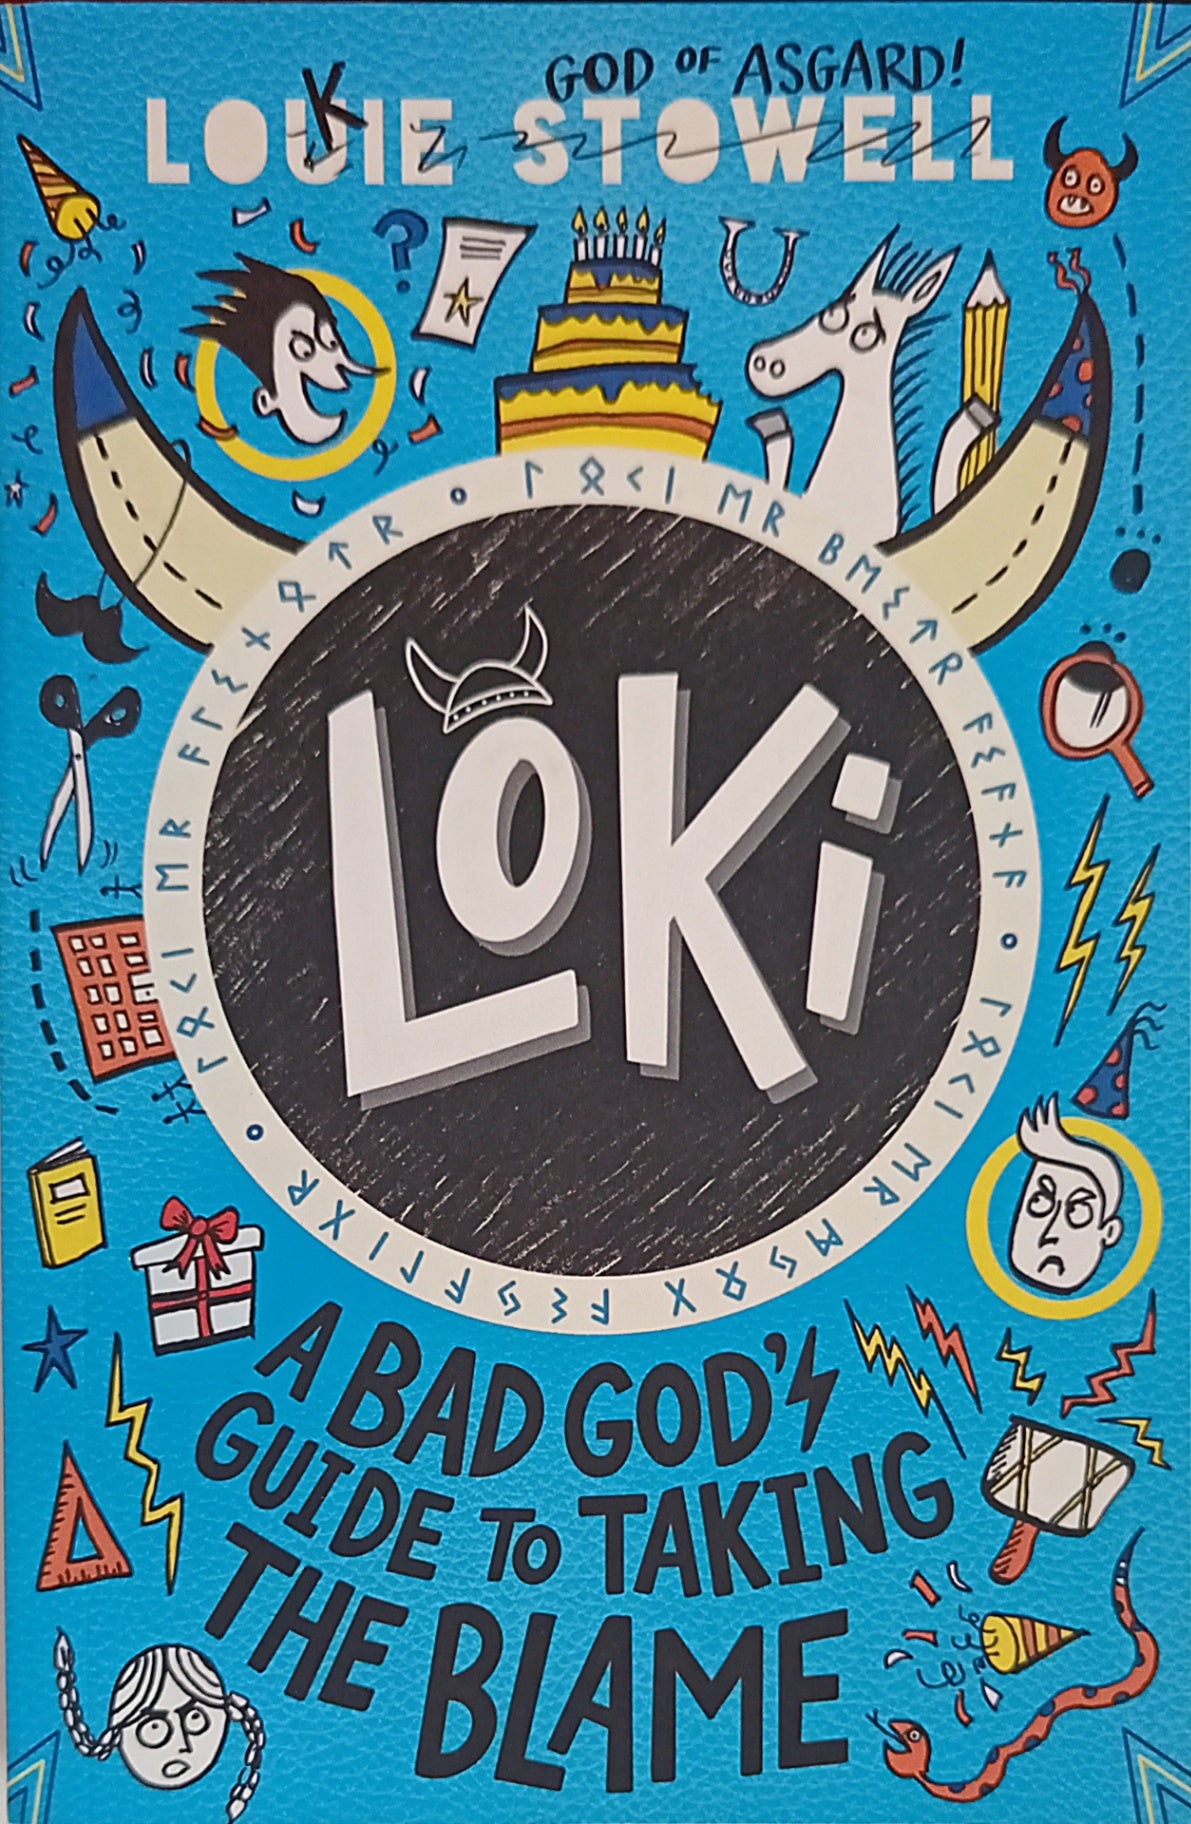 Loki: A Bad God's Guide to Taking the Blame